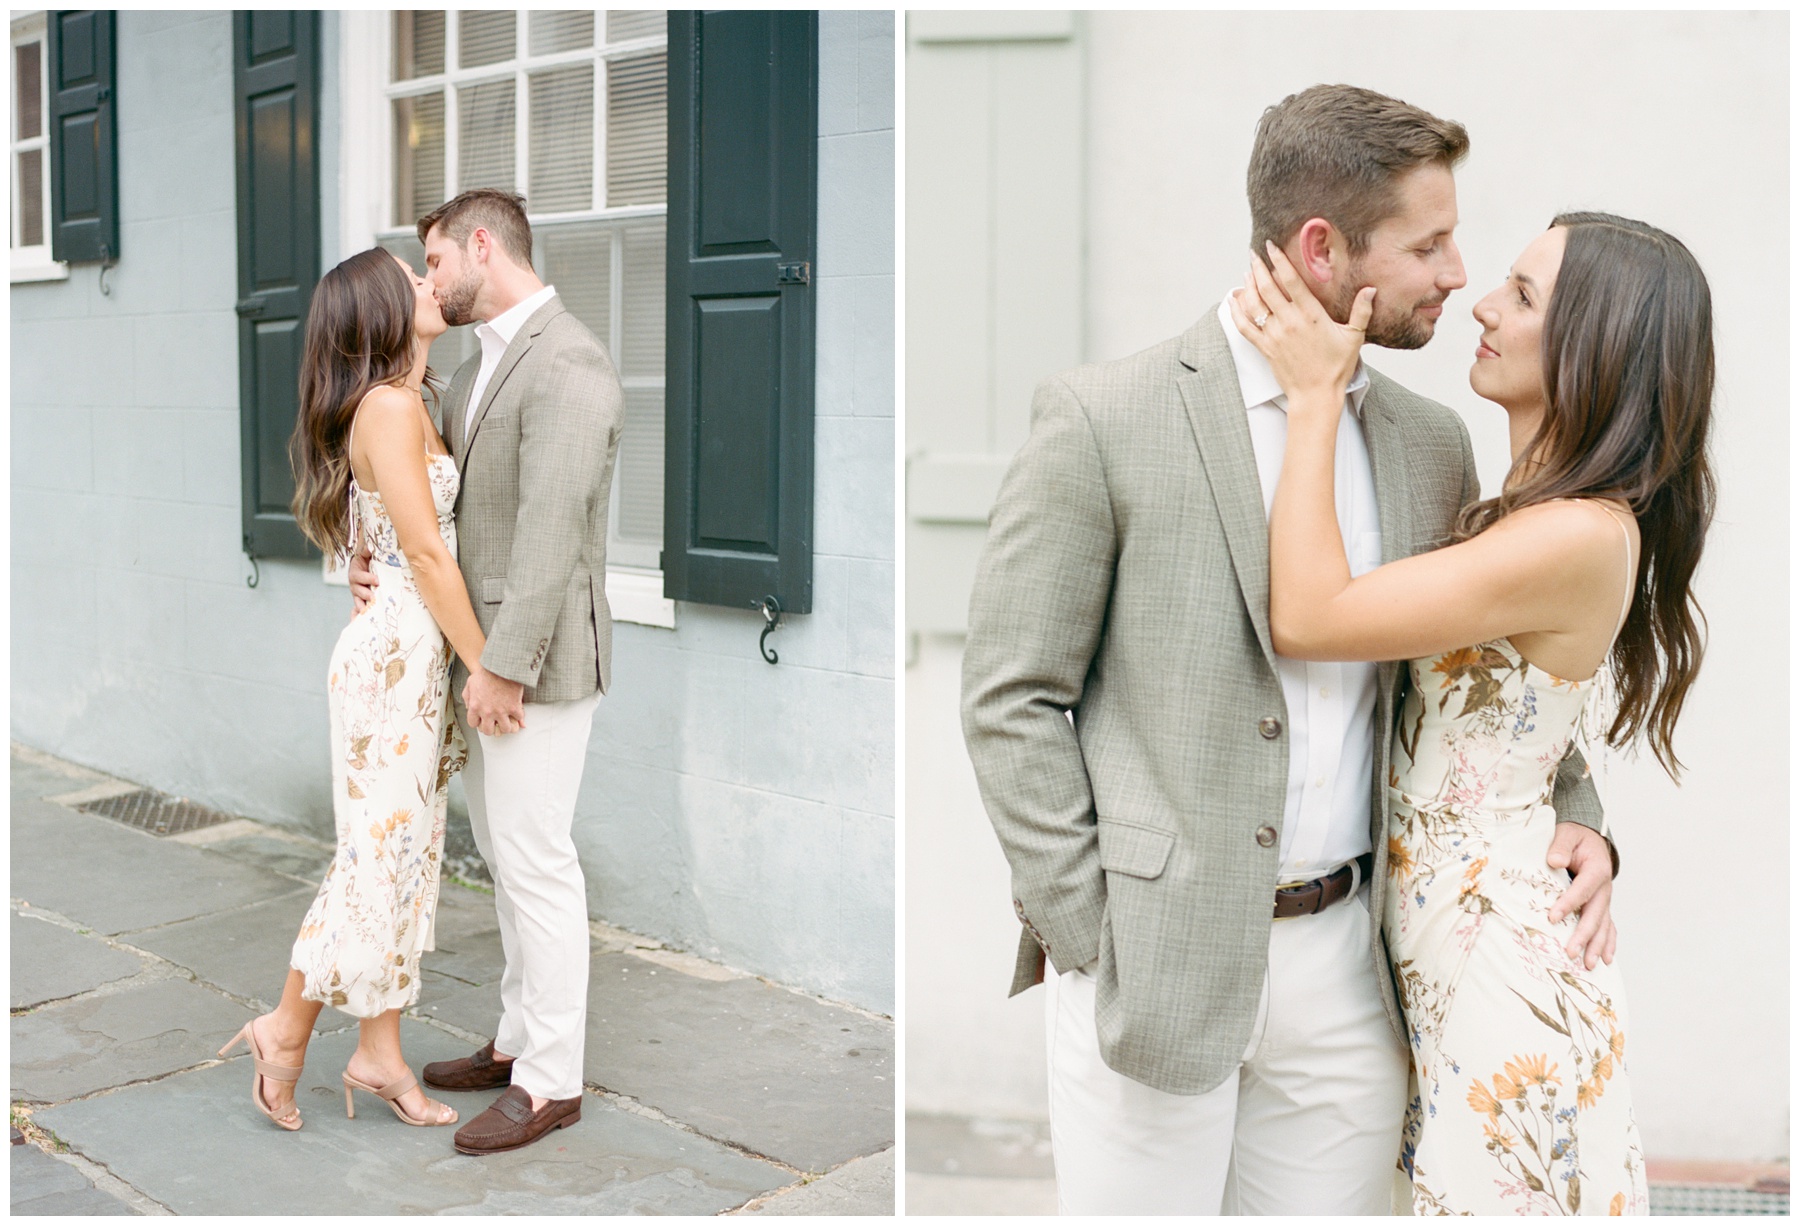 groom leans to kiss bride holding her hand in front of blue house with green shutters 